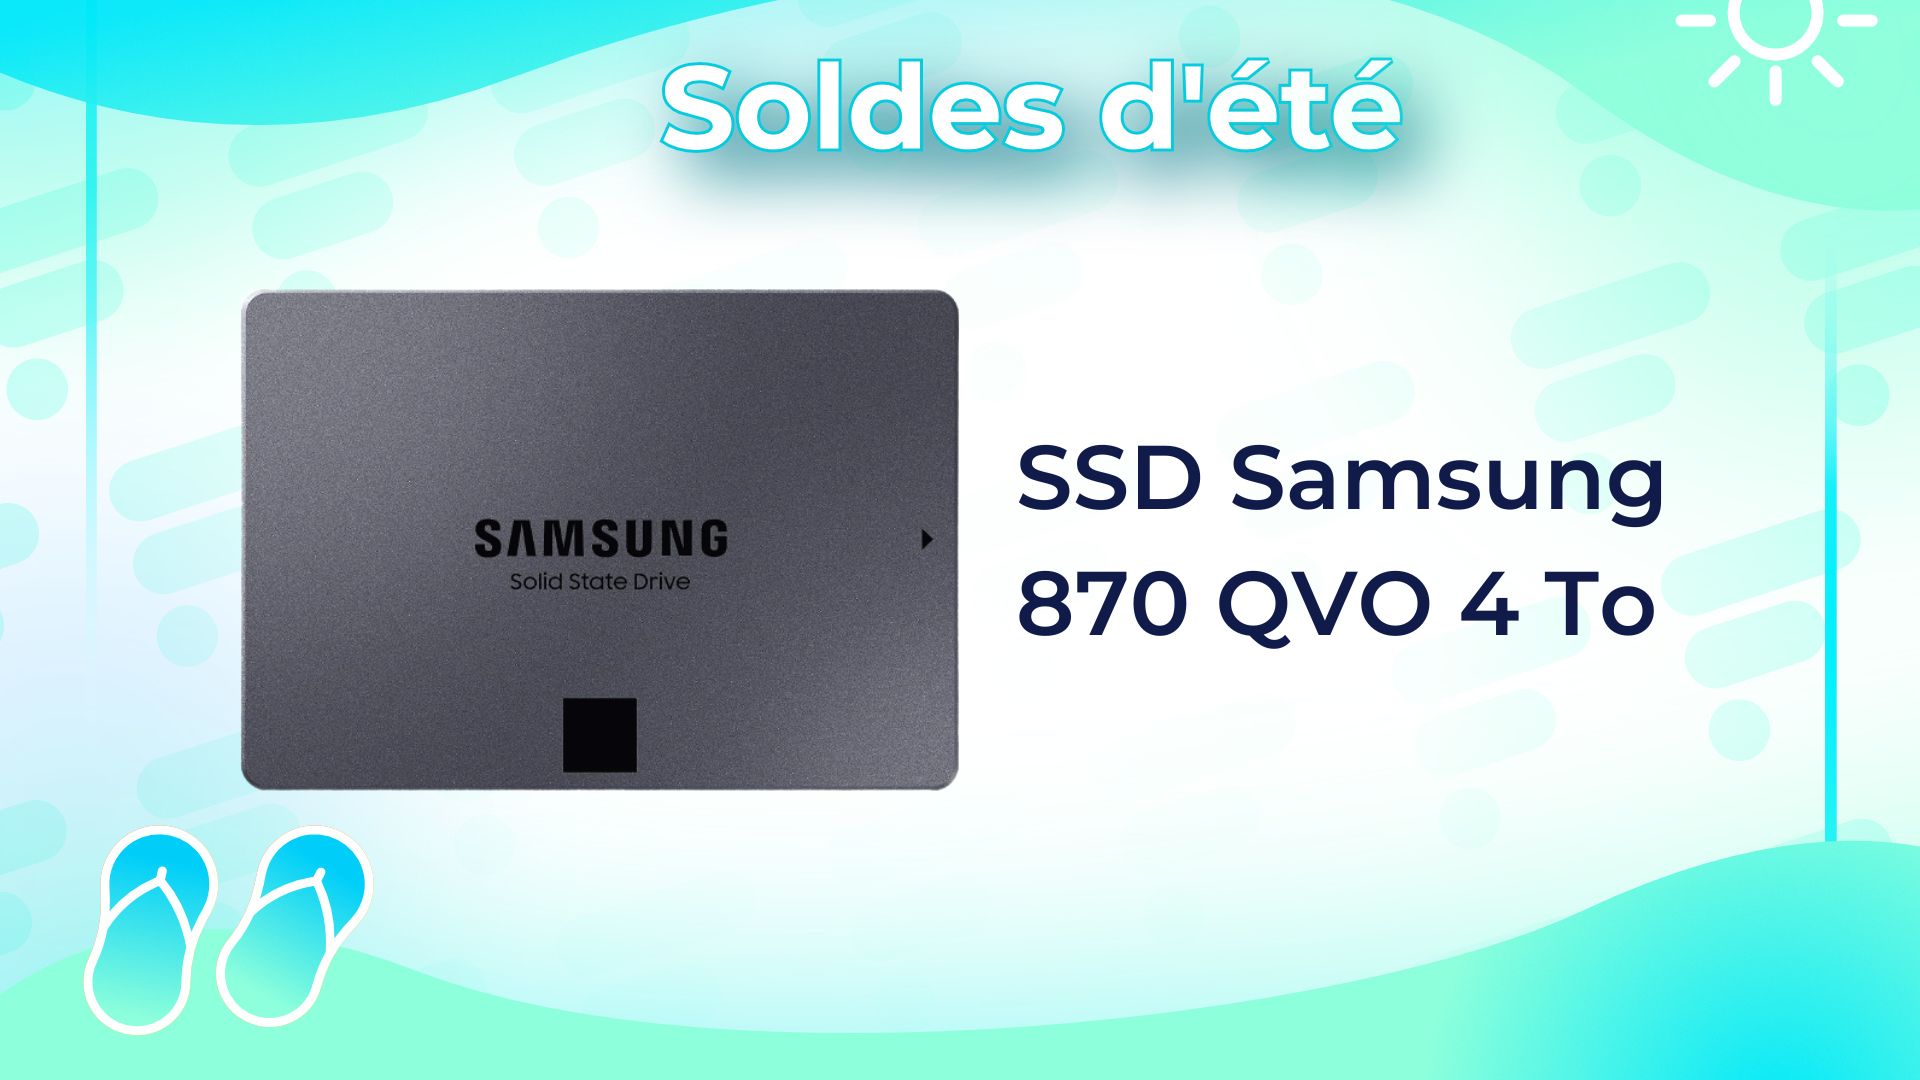 https://images.frandroid.com/wp-content/uploads/2023/06/ssd-samsung-870-qvo-4-to-soldes-ete-2023.jpg